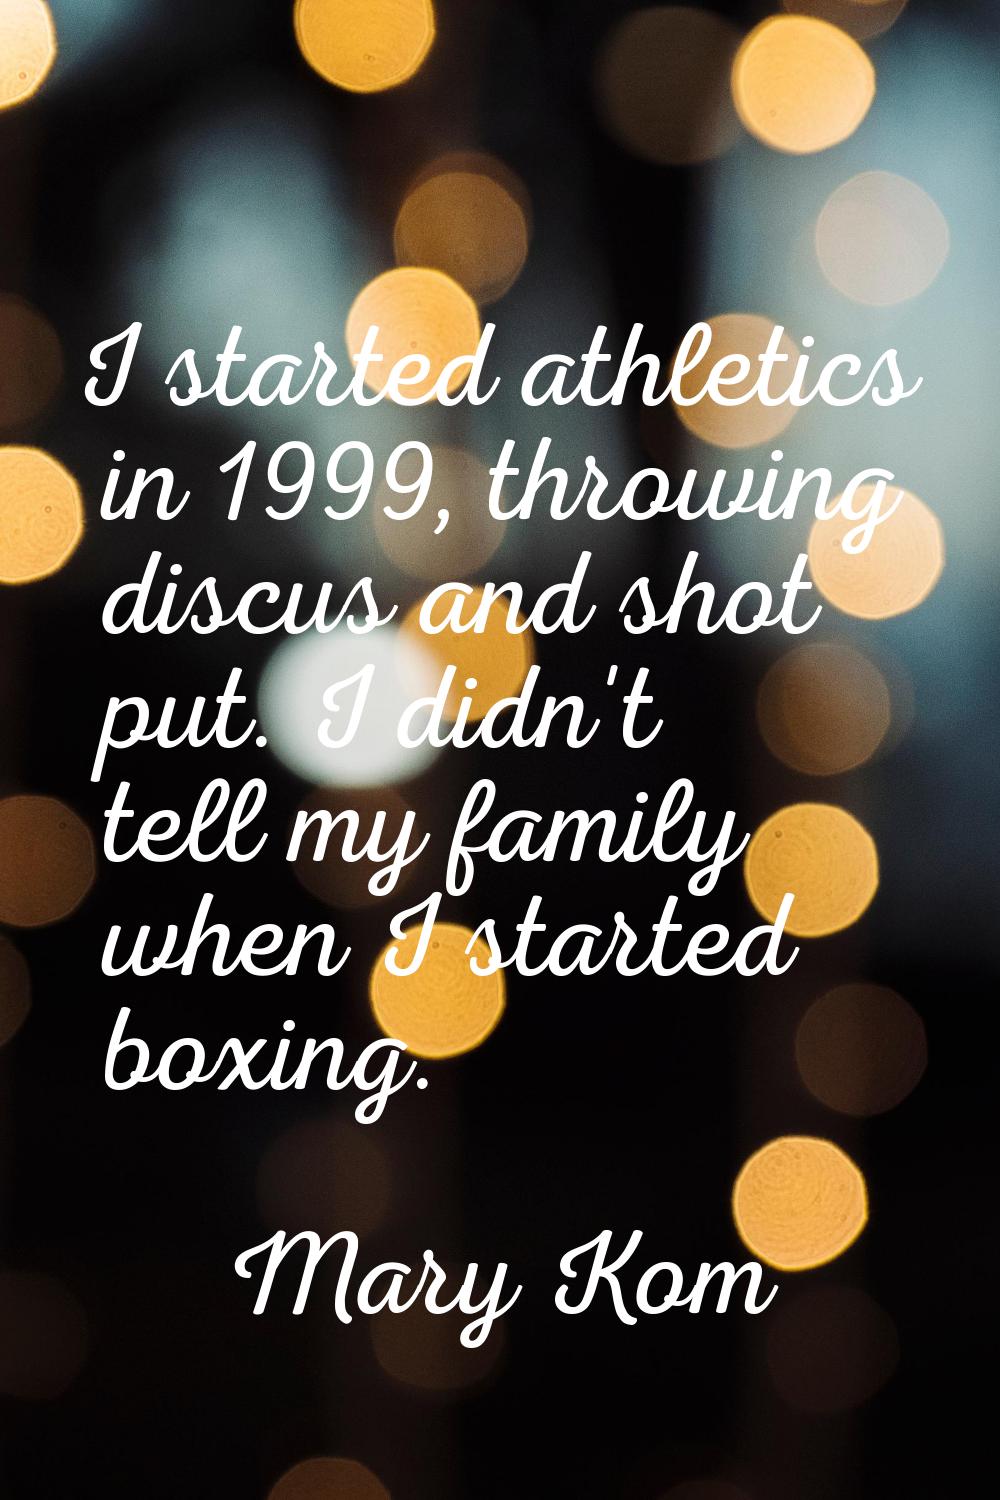 I started athletics in 1999, throwing discus and shot put. I didn't tell my family when I started b